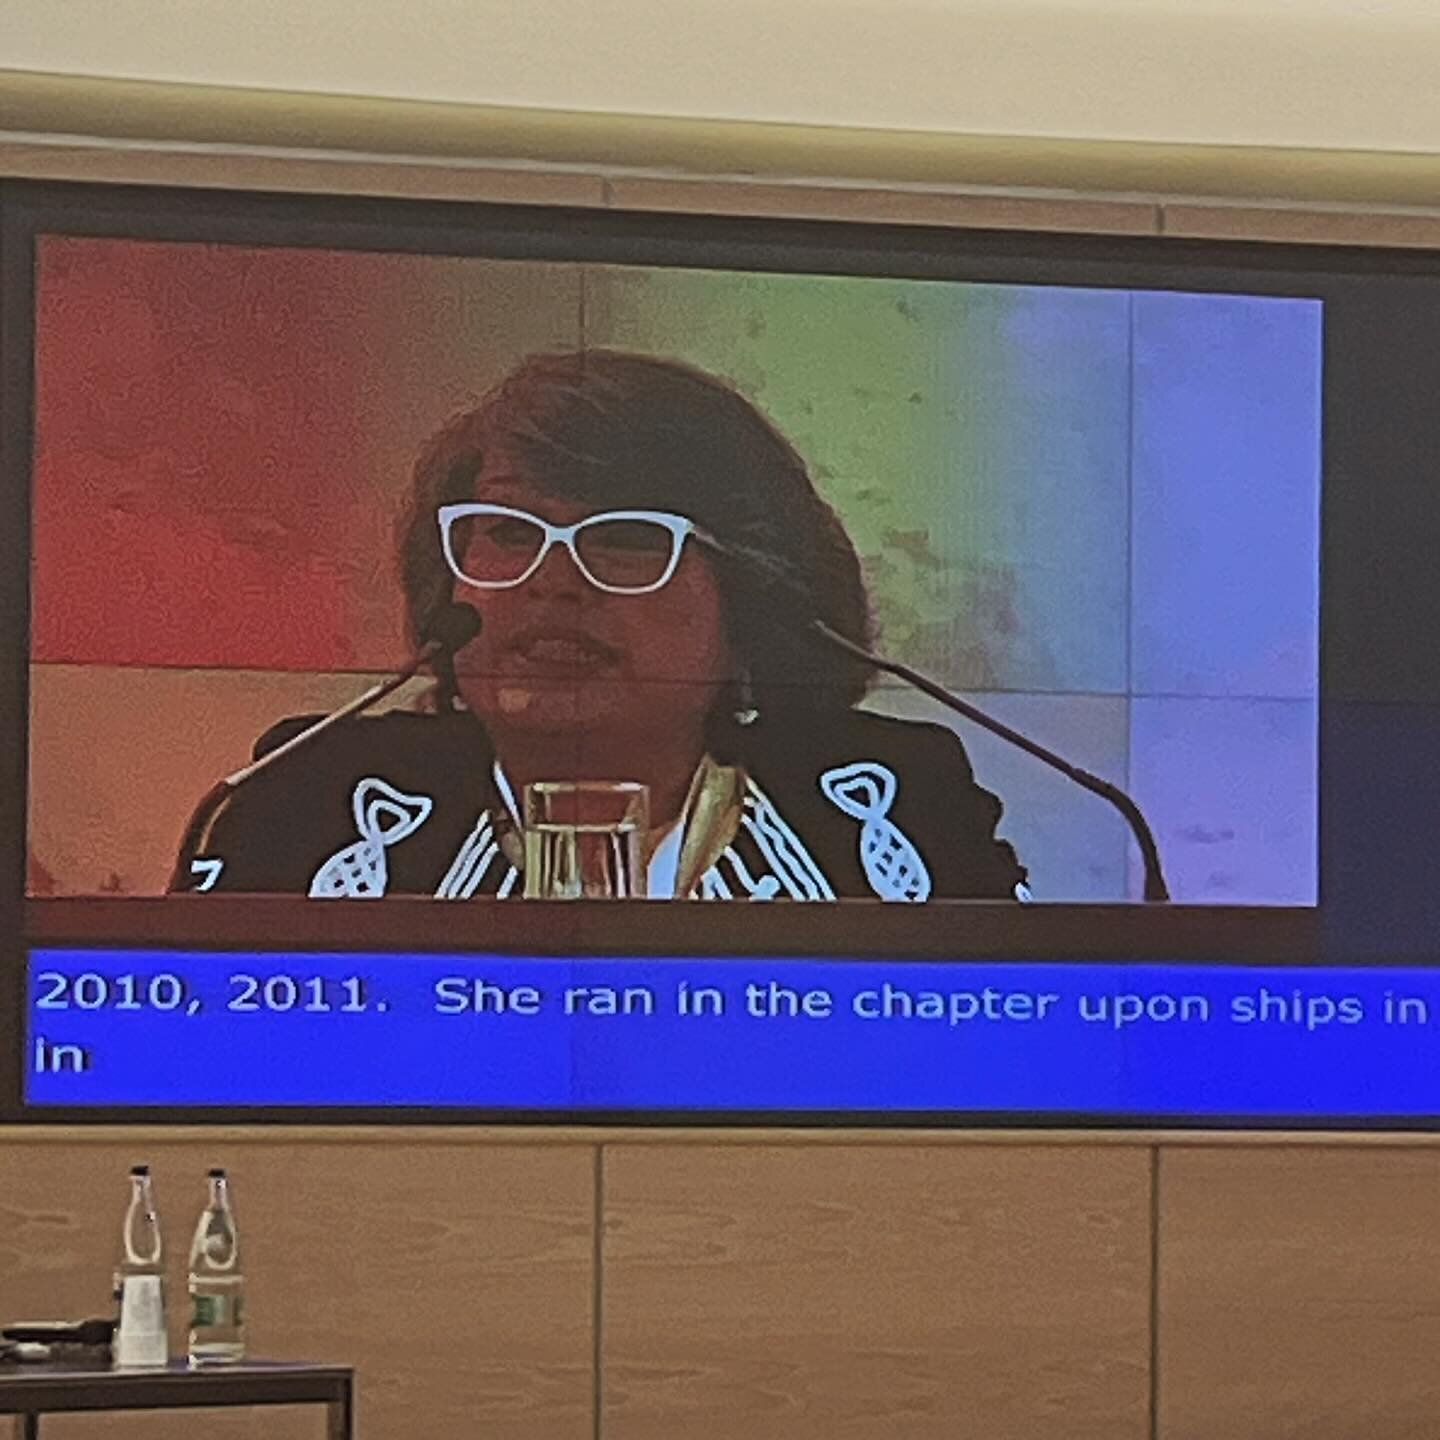 &ldquo;All women&rsquo;s bodies in sport are policed&rdquo;. Dr Payoshni Mitra&rsquo;s keynote at Sporting Chance Forum 2023 @unitednations @unitednationshumanrights @sportandrights